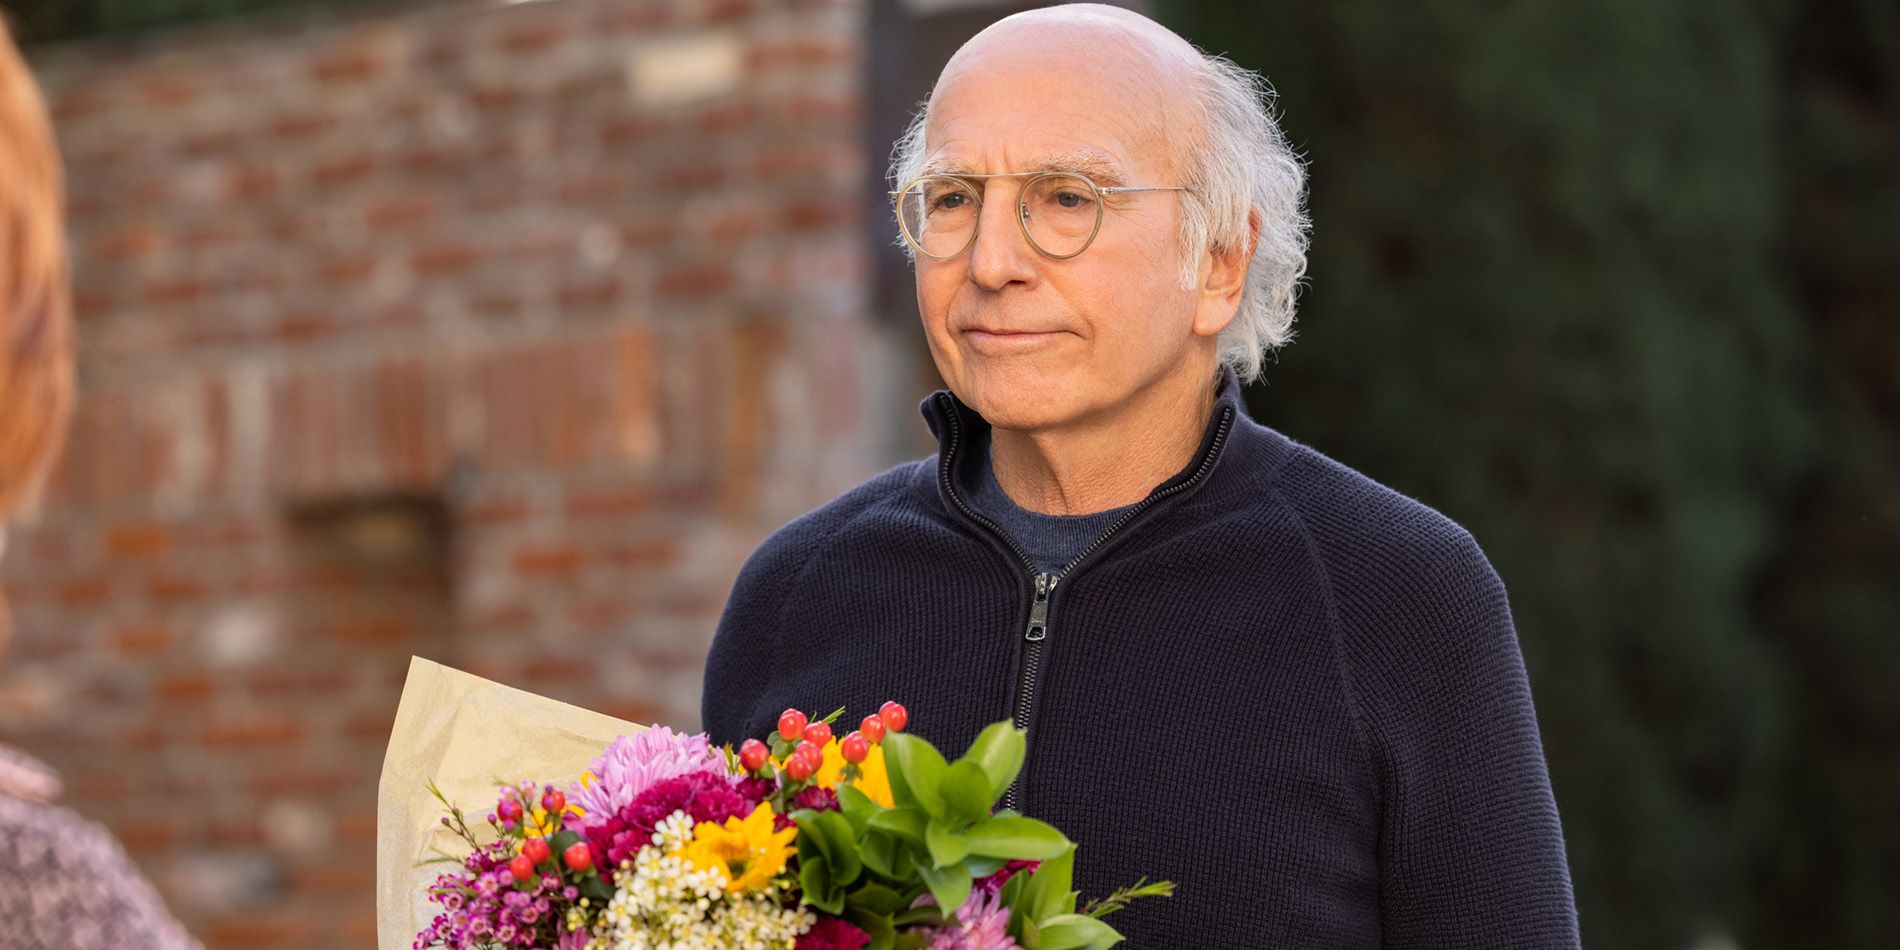 Larry David looking annoyed while holding flowers in Curb Your Enthusiasm season 11